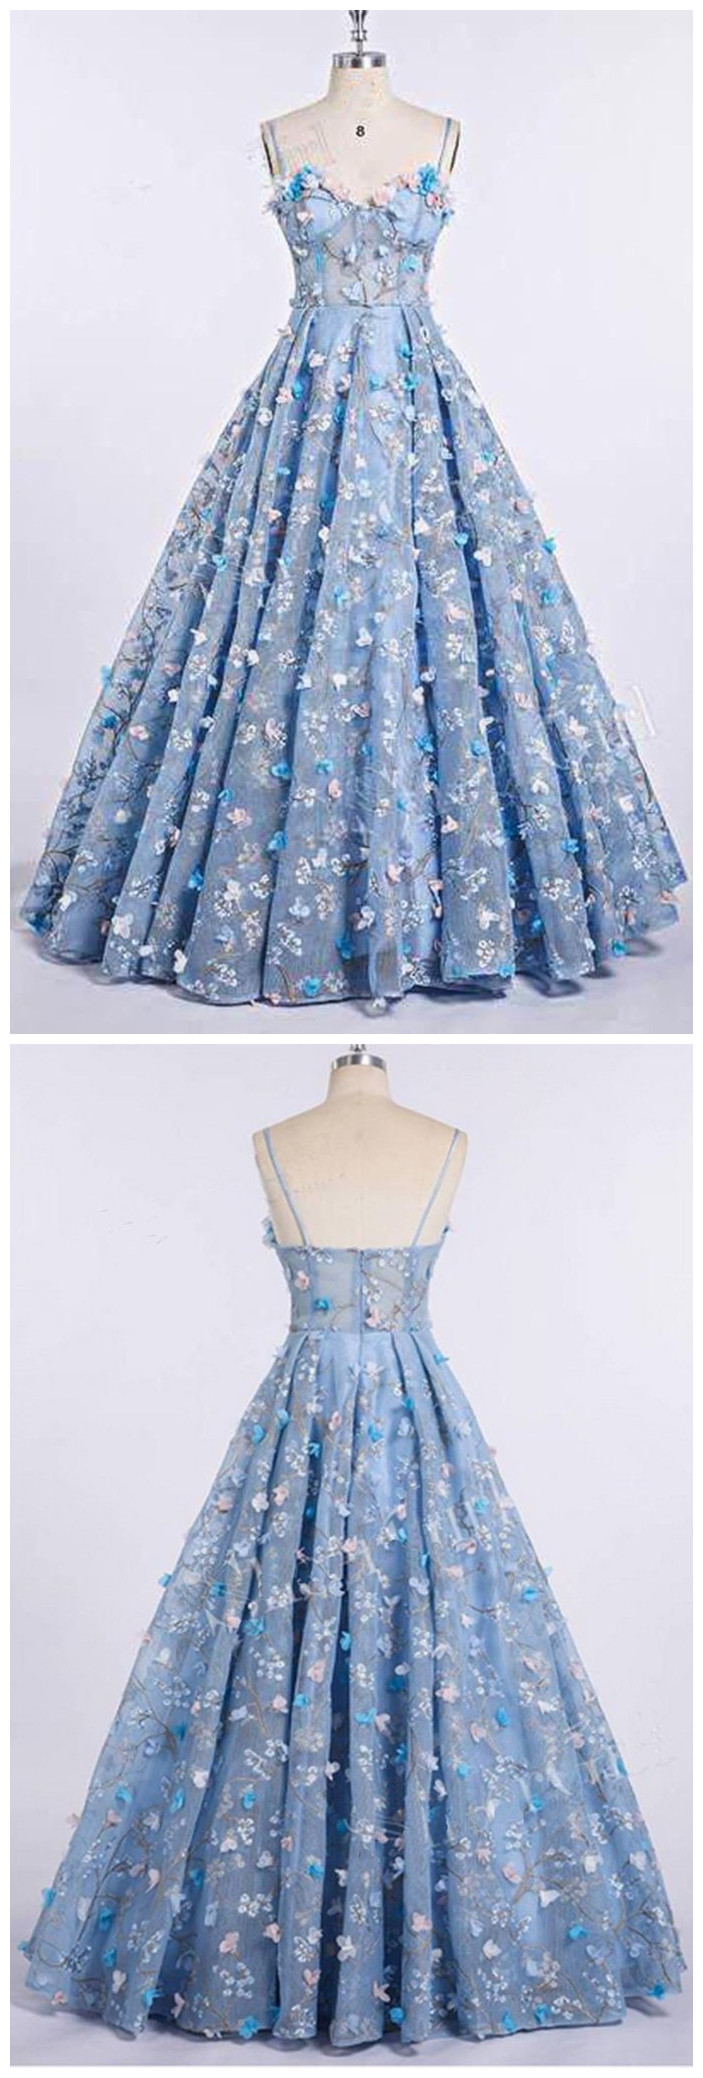 Blue Lace Spaghetti Strap 3d Flowers Applique Prom Dress, Ball Gowns